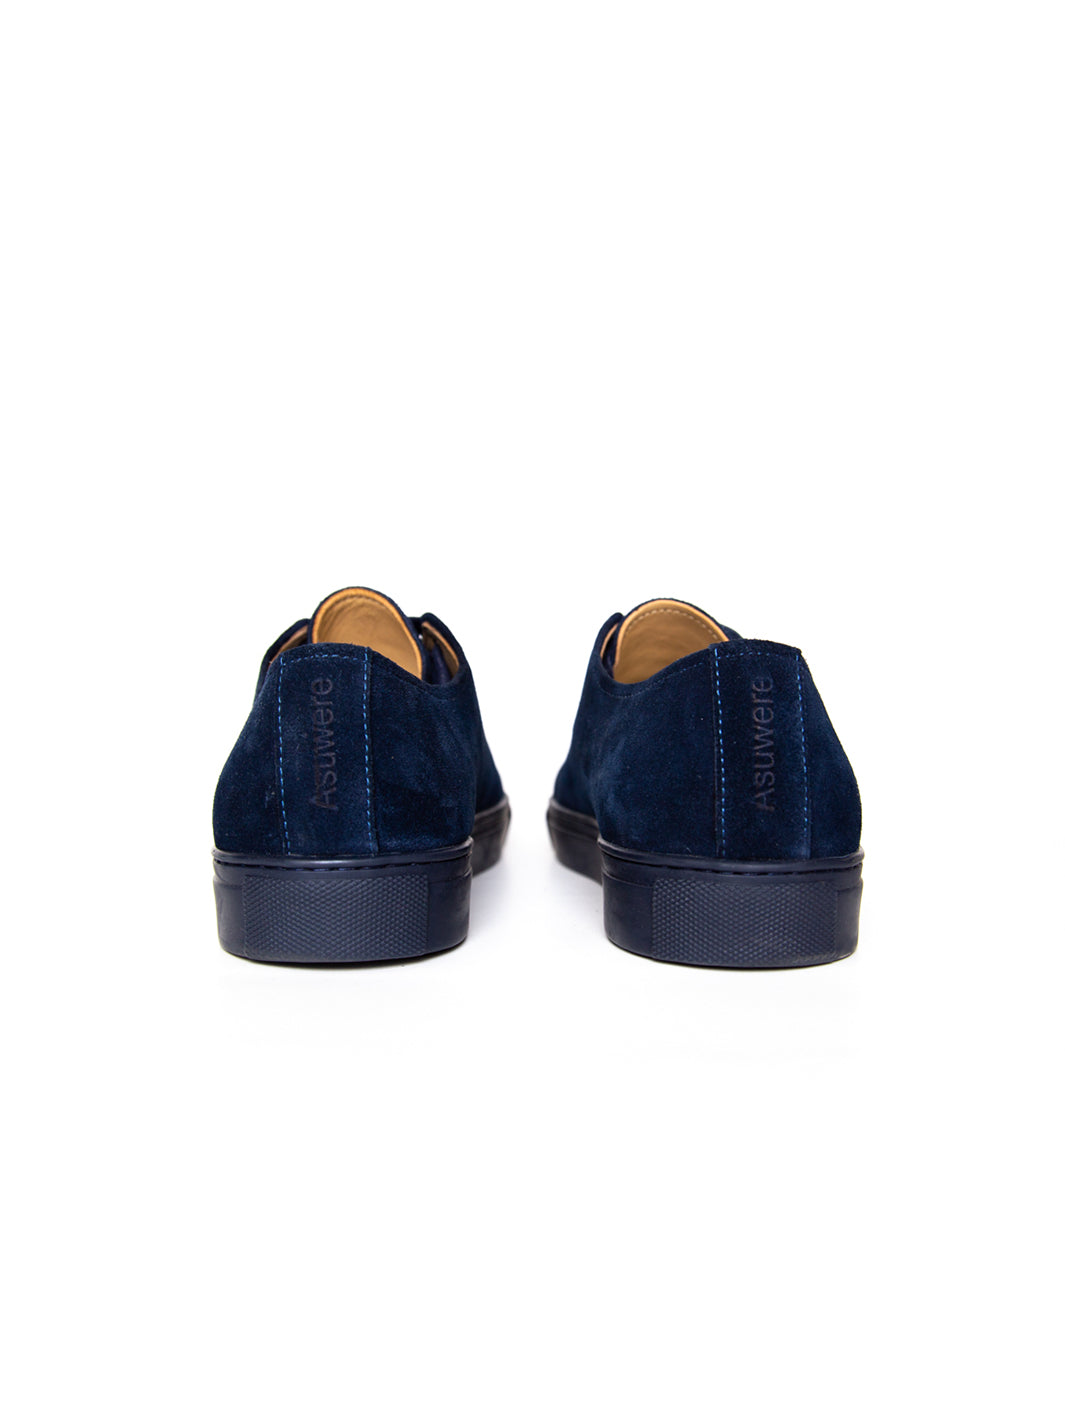 Navy suede leather sneakers heel detail with embossed Asuwere logo